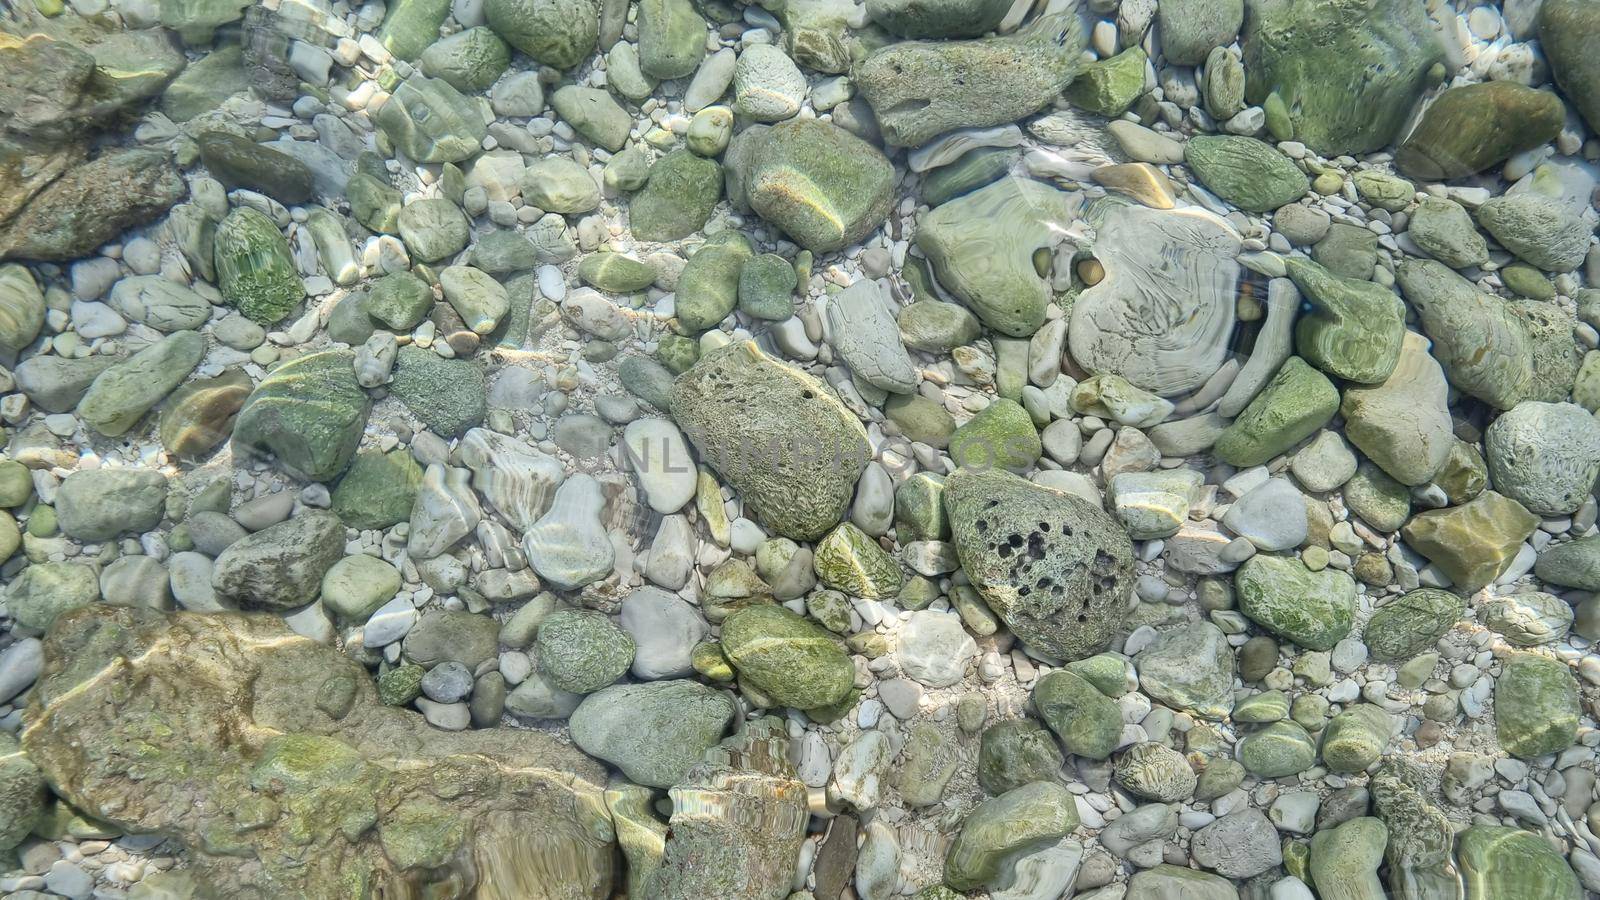 Blurred abstract marine background, stones underwater. Clear sea water covers the rocks by anytka